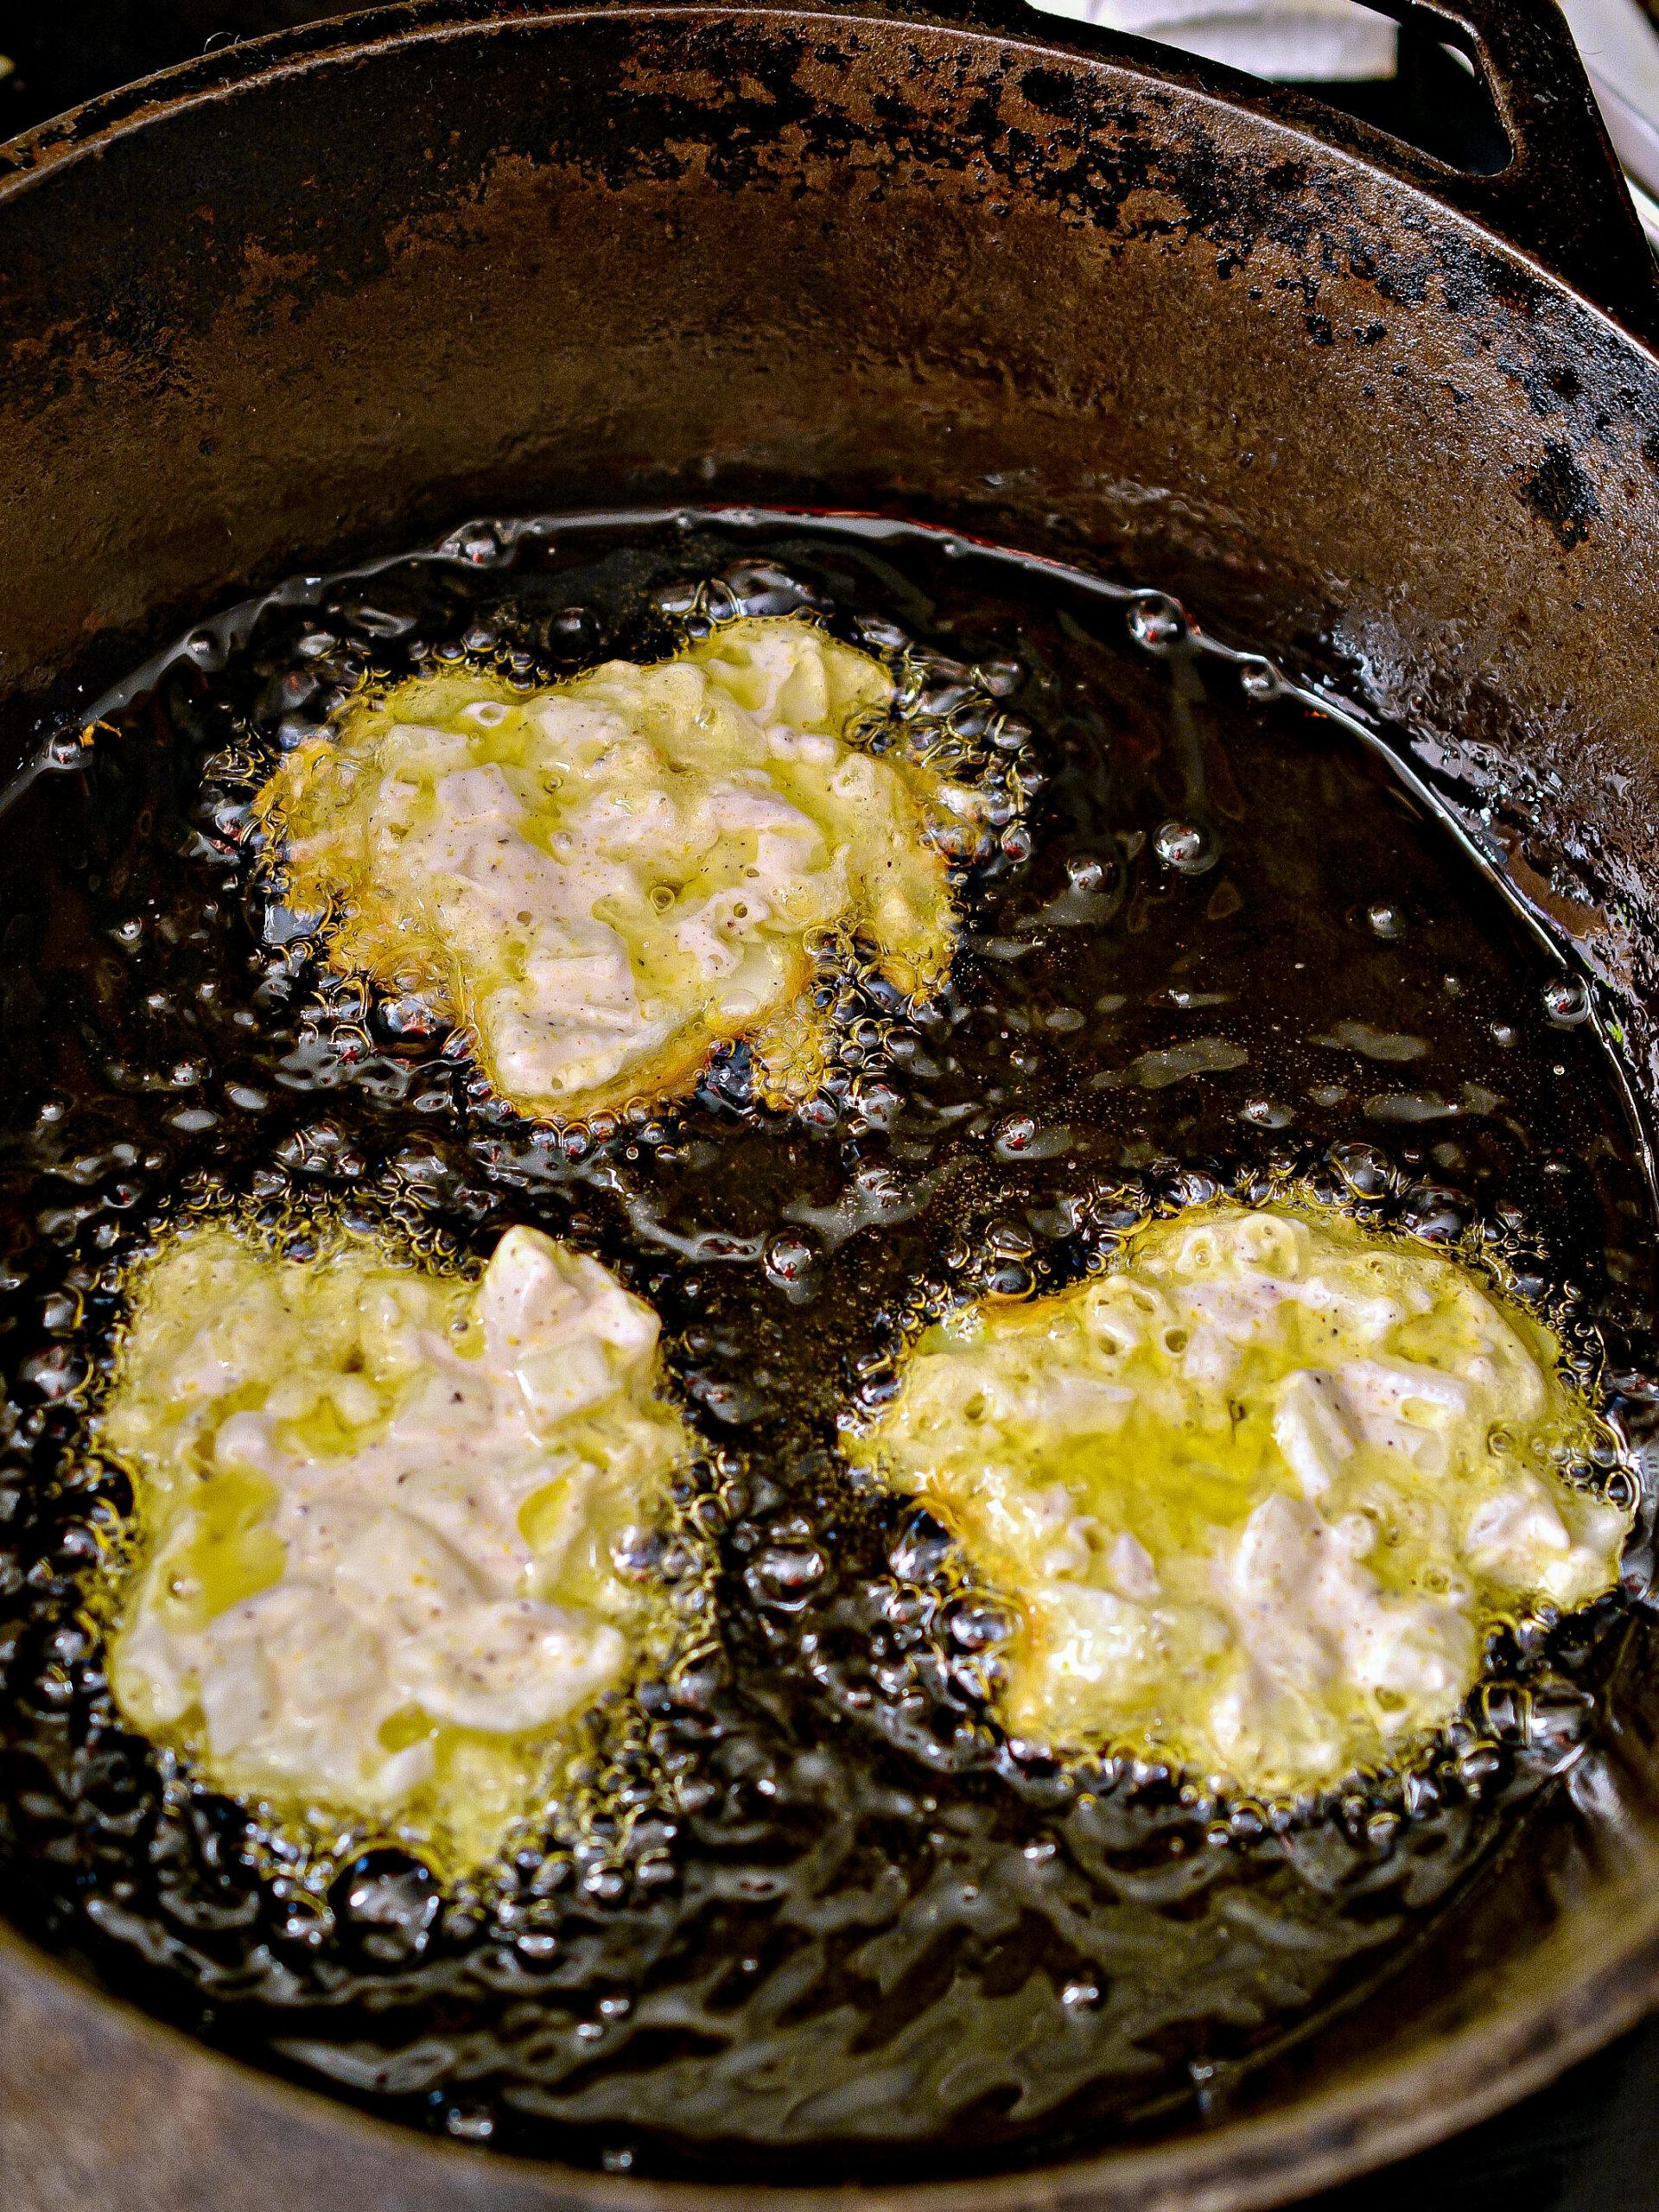 When the oil has reached a temperature of at least 175 degrees, drop the batter into the skillet by the tablespoon, spreading it out a bit as you go.